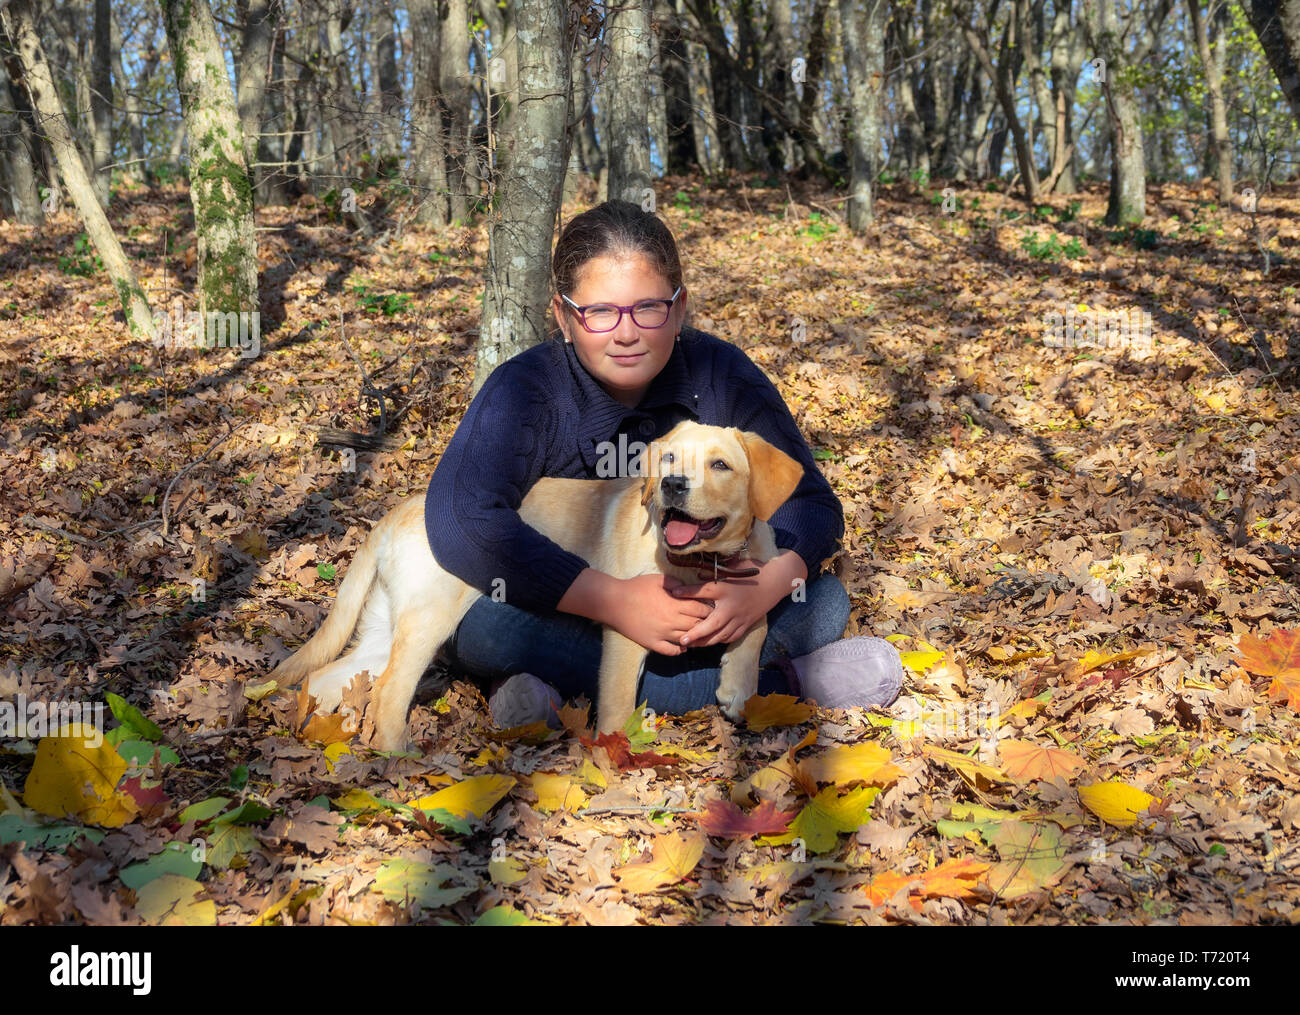 Portrait of Girl with dog in autumn forest Banque D'Images